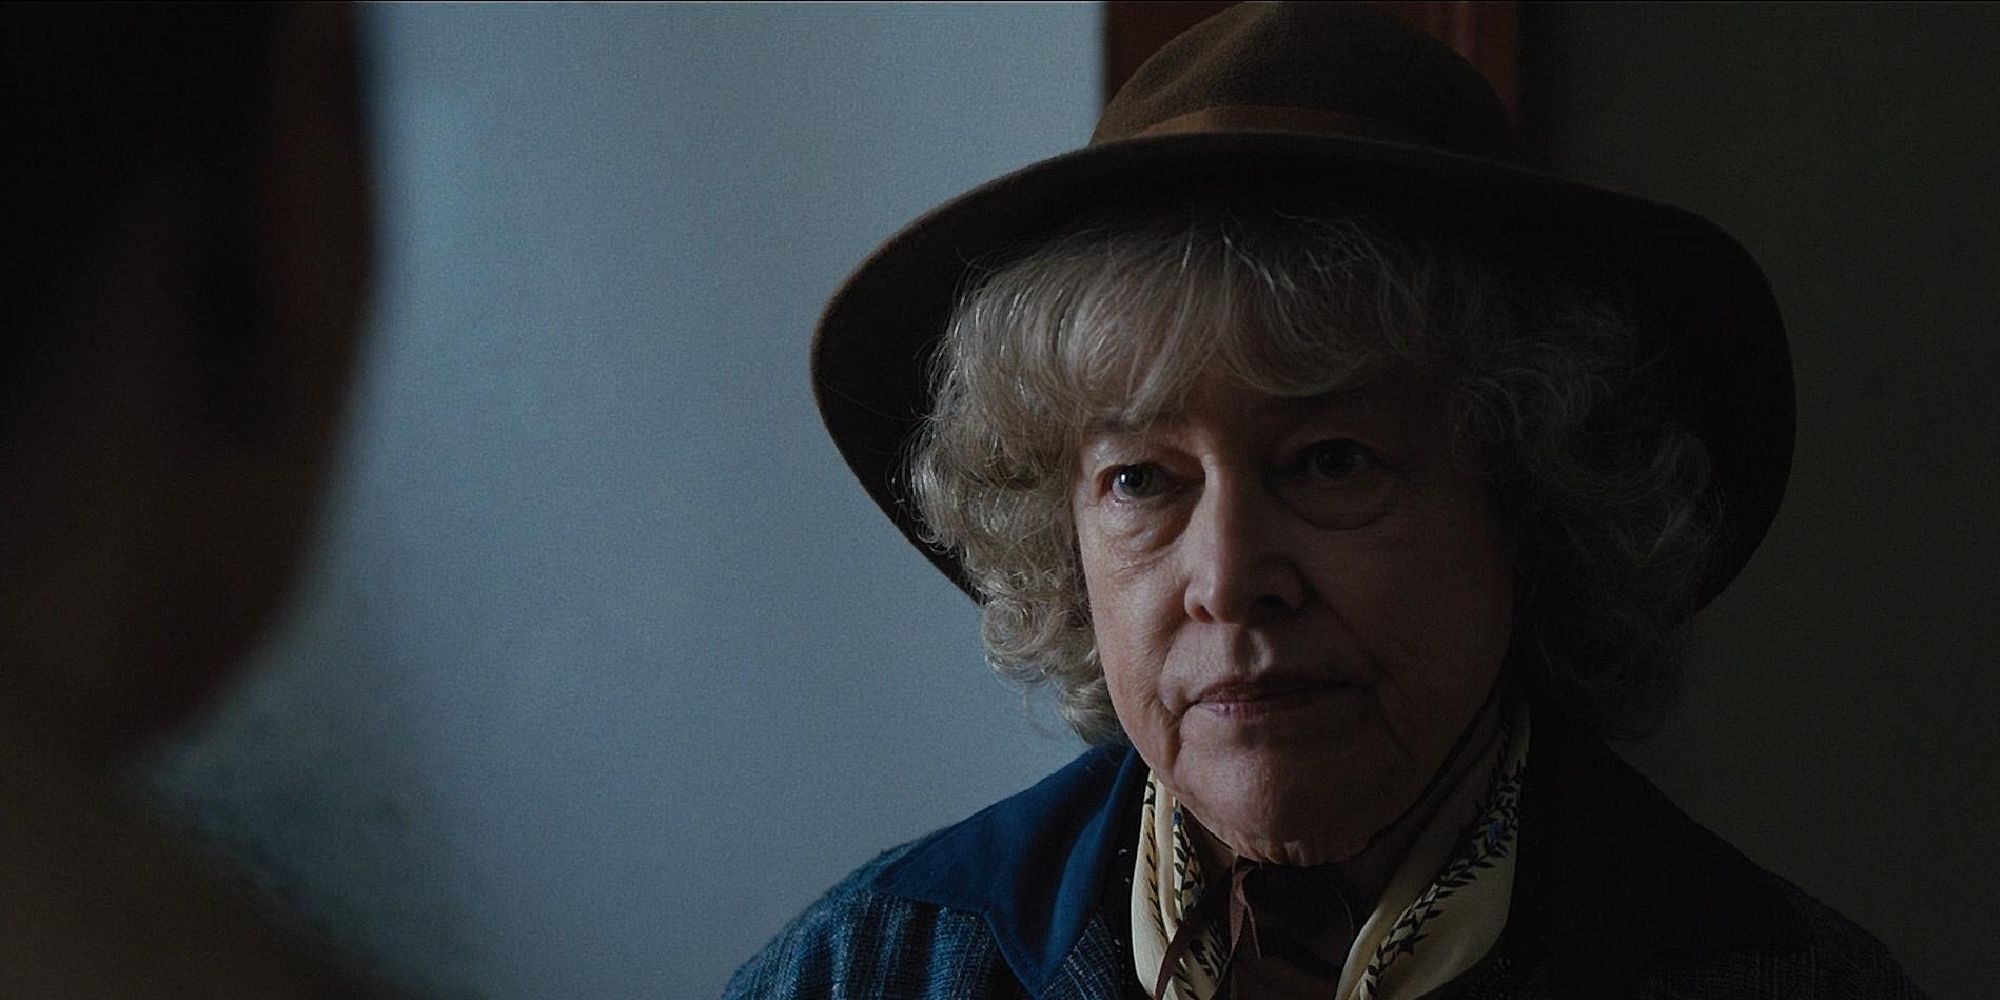 Kathy Bates in On the Basis of Sex